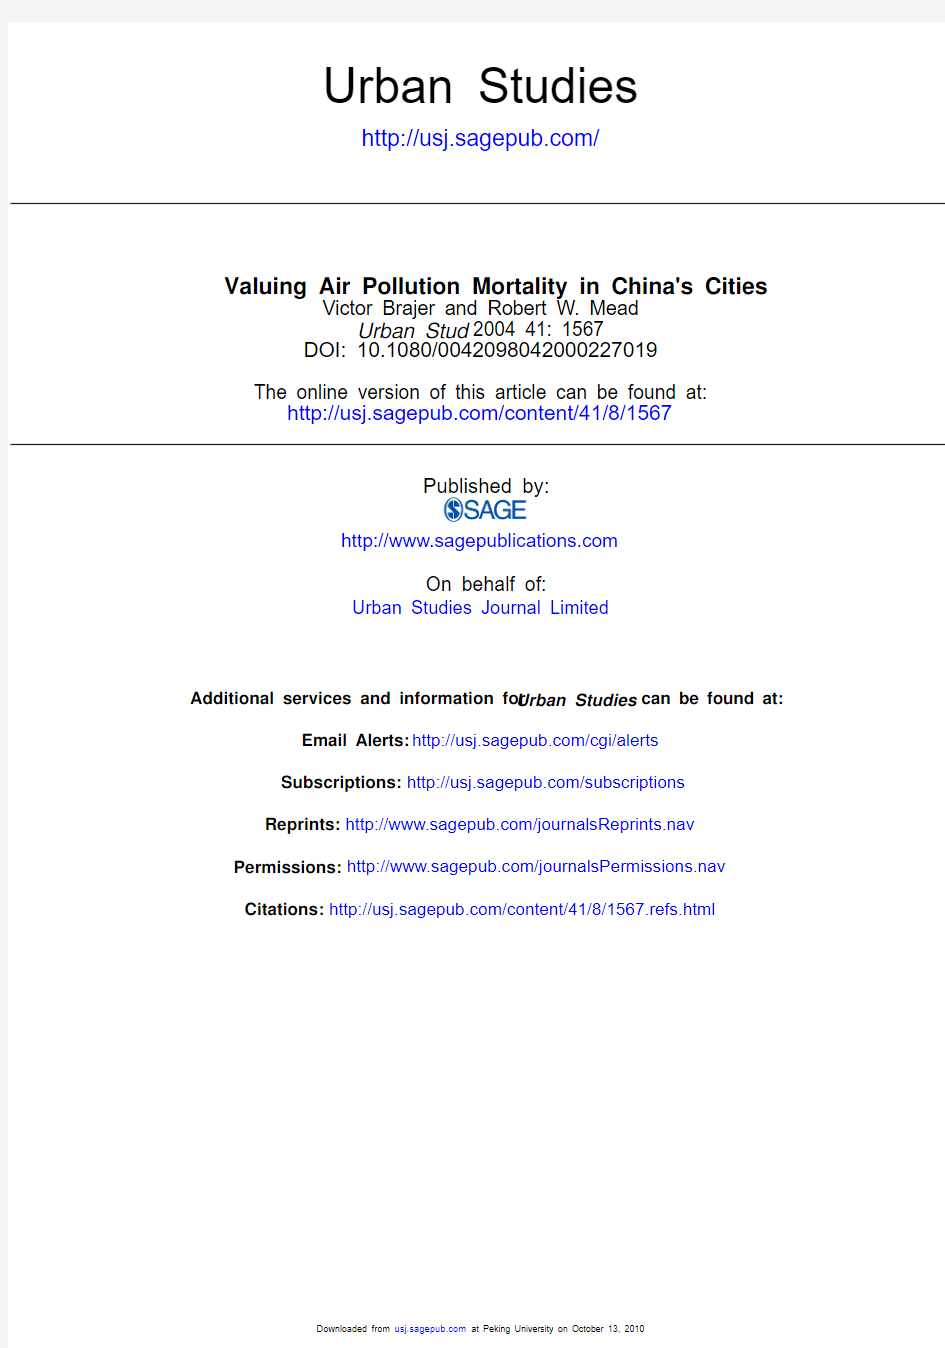 Valuing Air Pollution Mortality in China's Cities